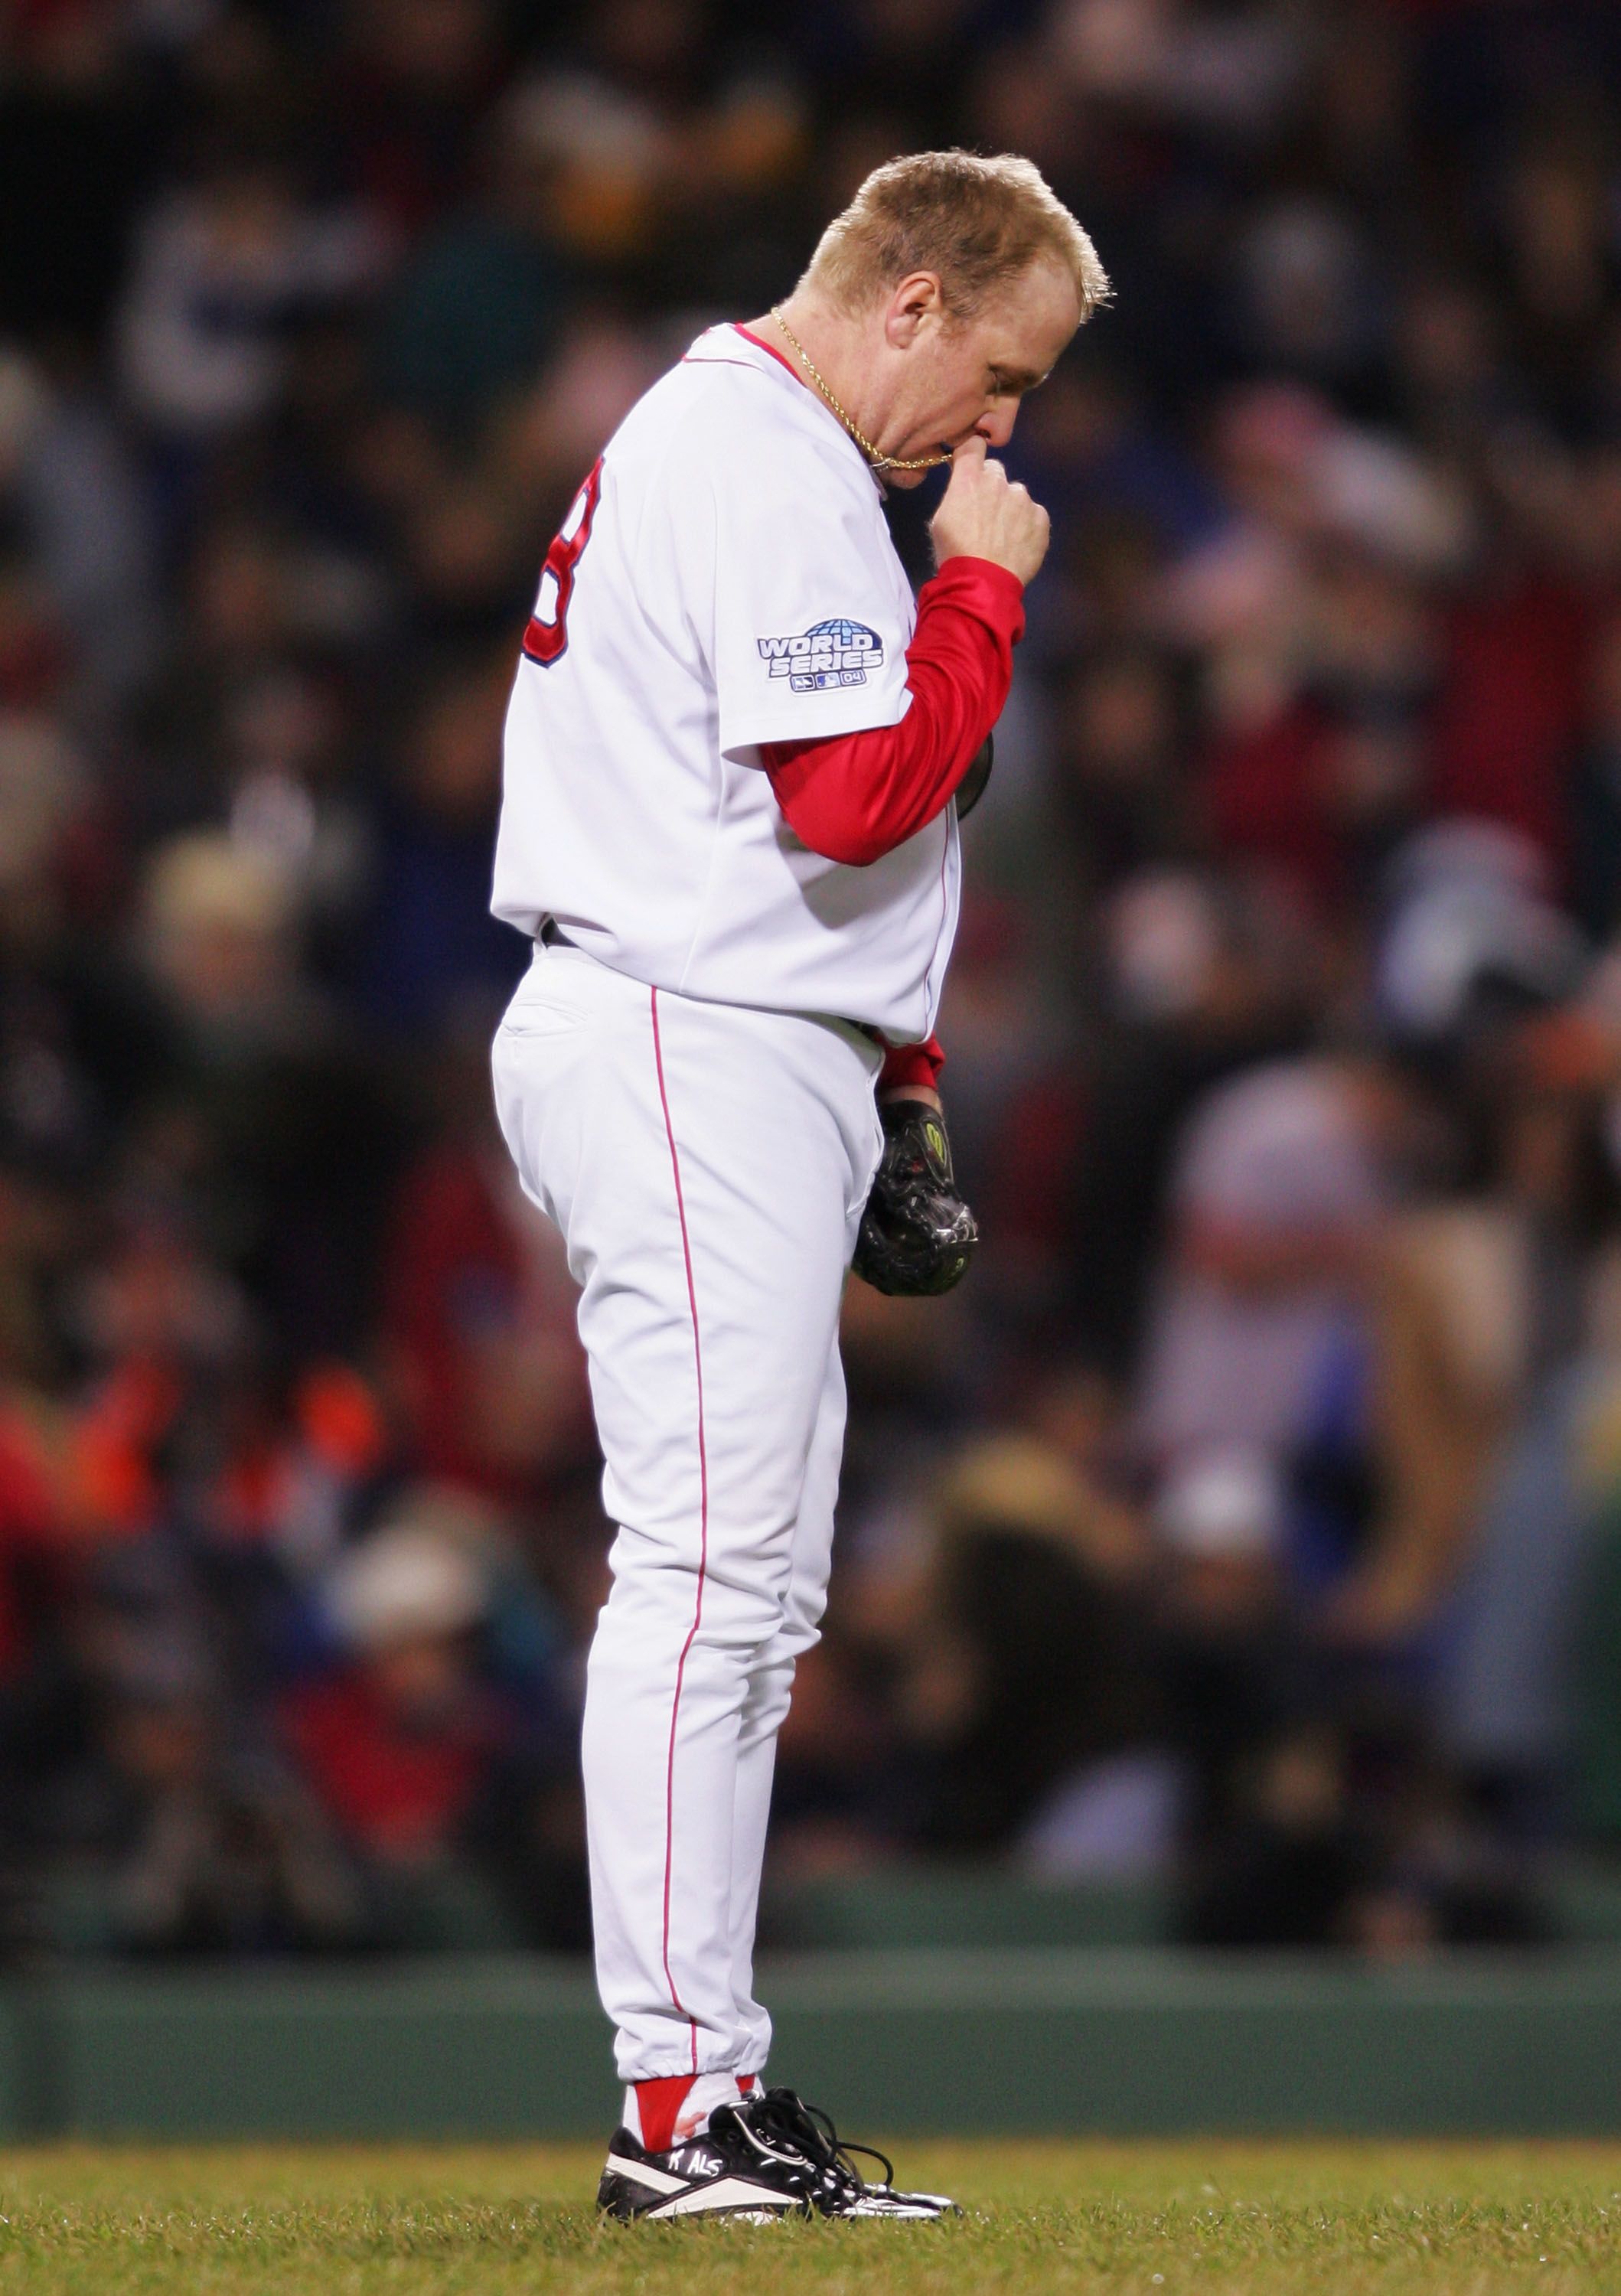 Curt Schilling's bloody sock sells for $92,613